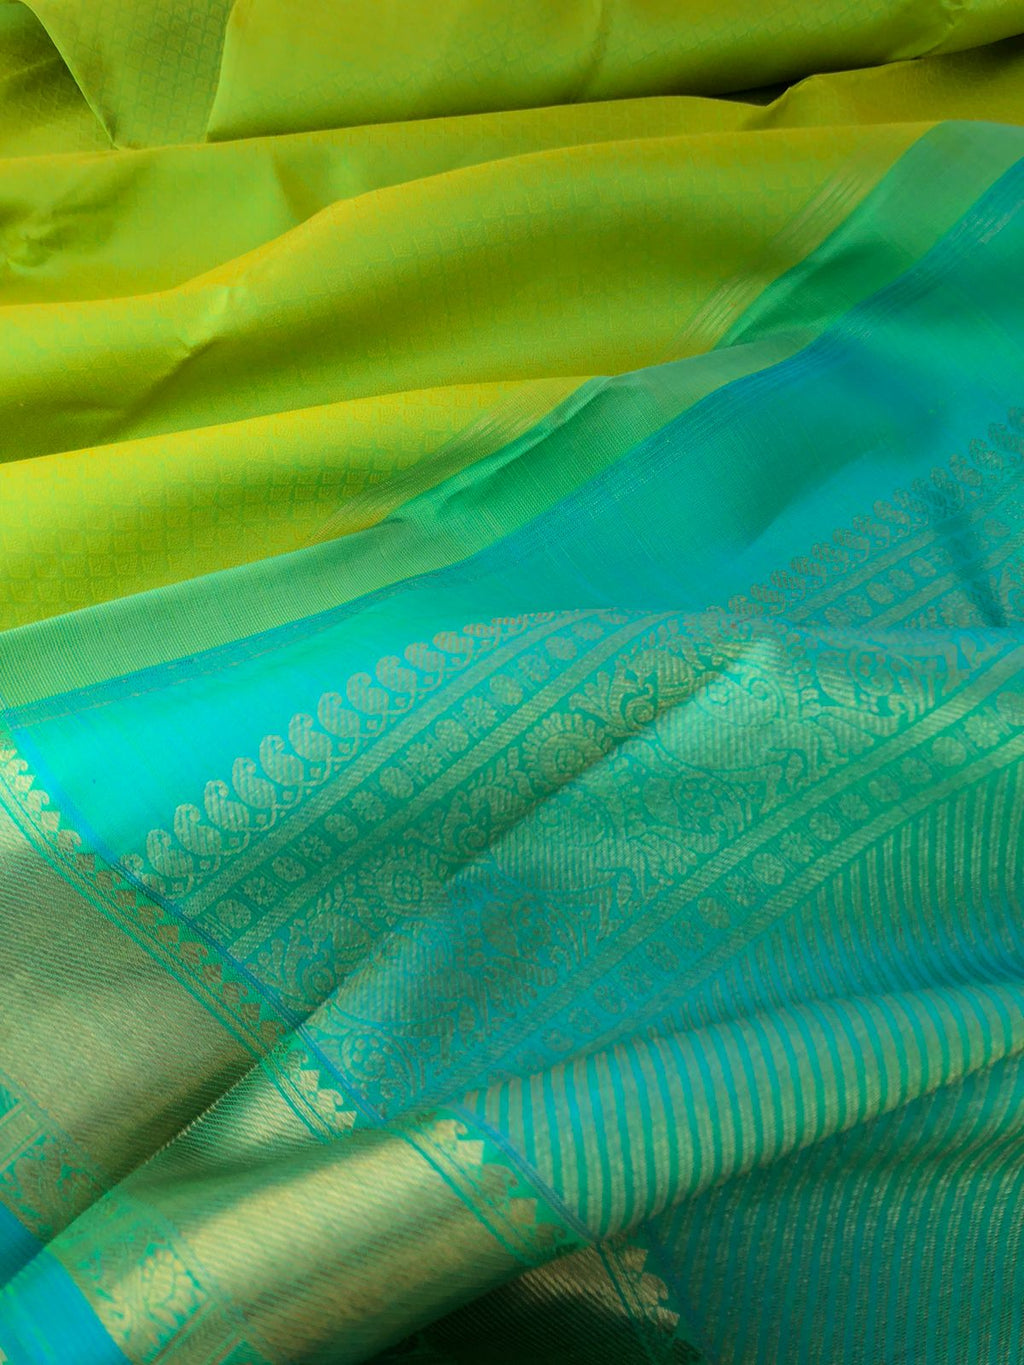 Swarnam - The Solid Kanchivarams - absolutely gorgeous fresh green and aqua blue with body jacard woven pattern